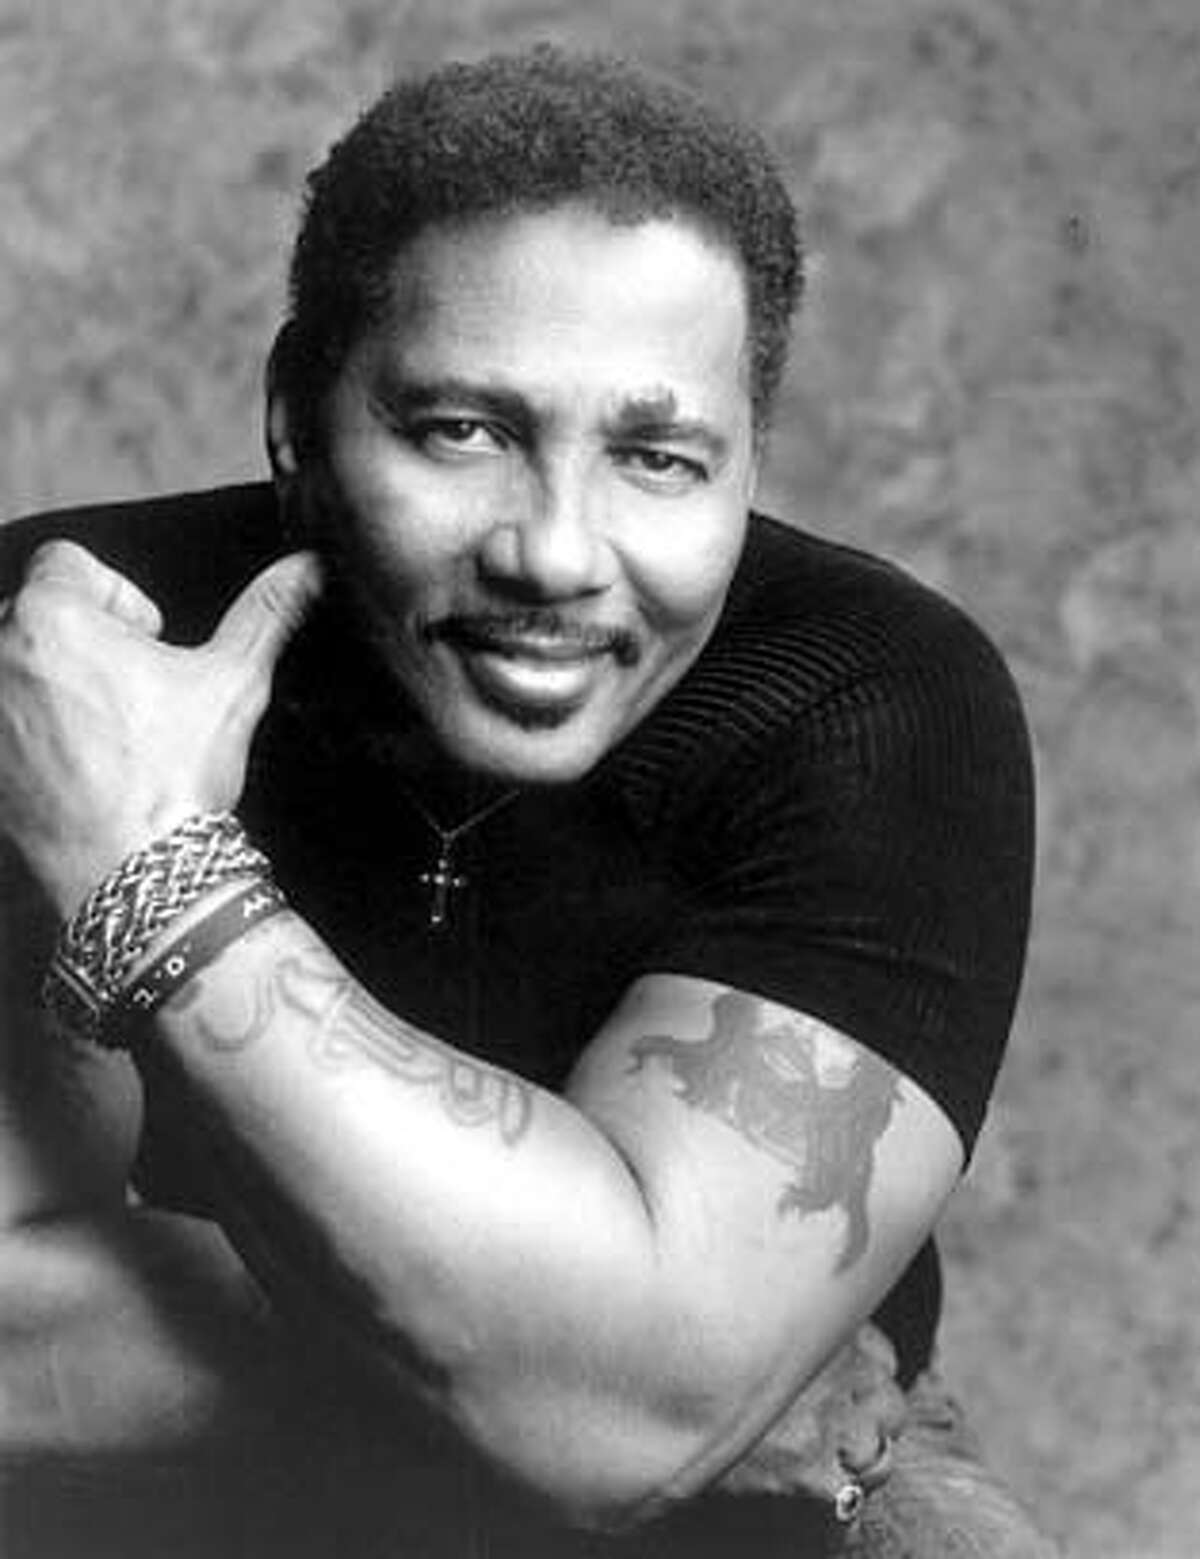 Aaron Neville will perform at Masonic Auditorium on Dec. 12th. ALSO RAN: 12/12/03 Aaron Neville will perform with the Blind Boys of Alabama at San Franciscos Masonic Auditorium on Friday, Dec. 12. Aaron Neville lends his soulful falsetto to holiday gospel songs. ProductNameChronicle ProductNameChronicle